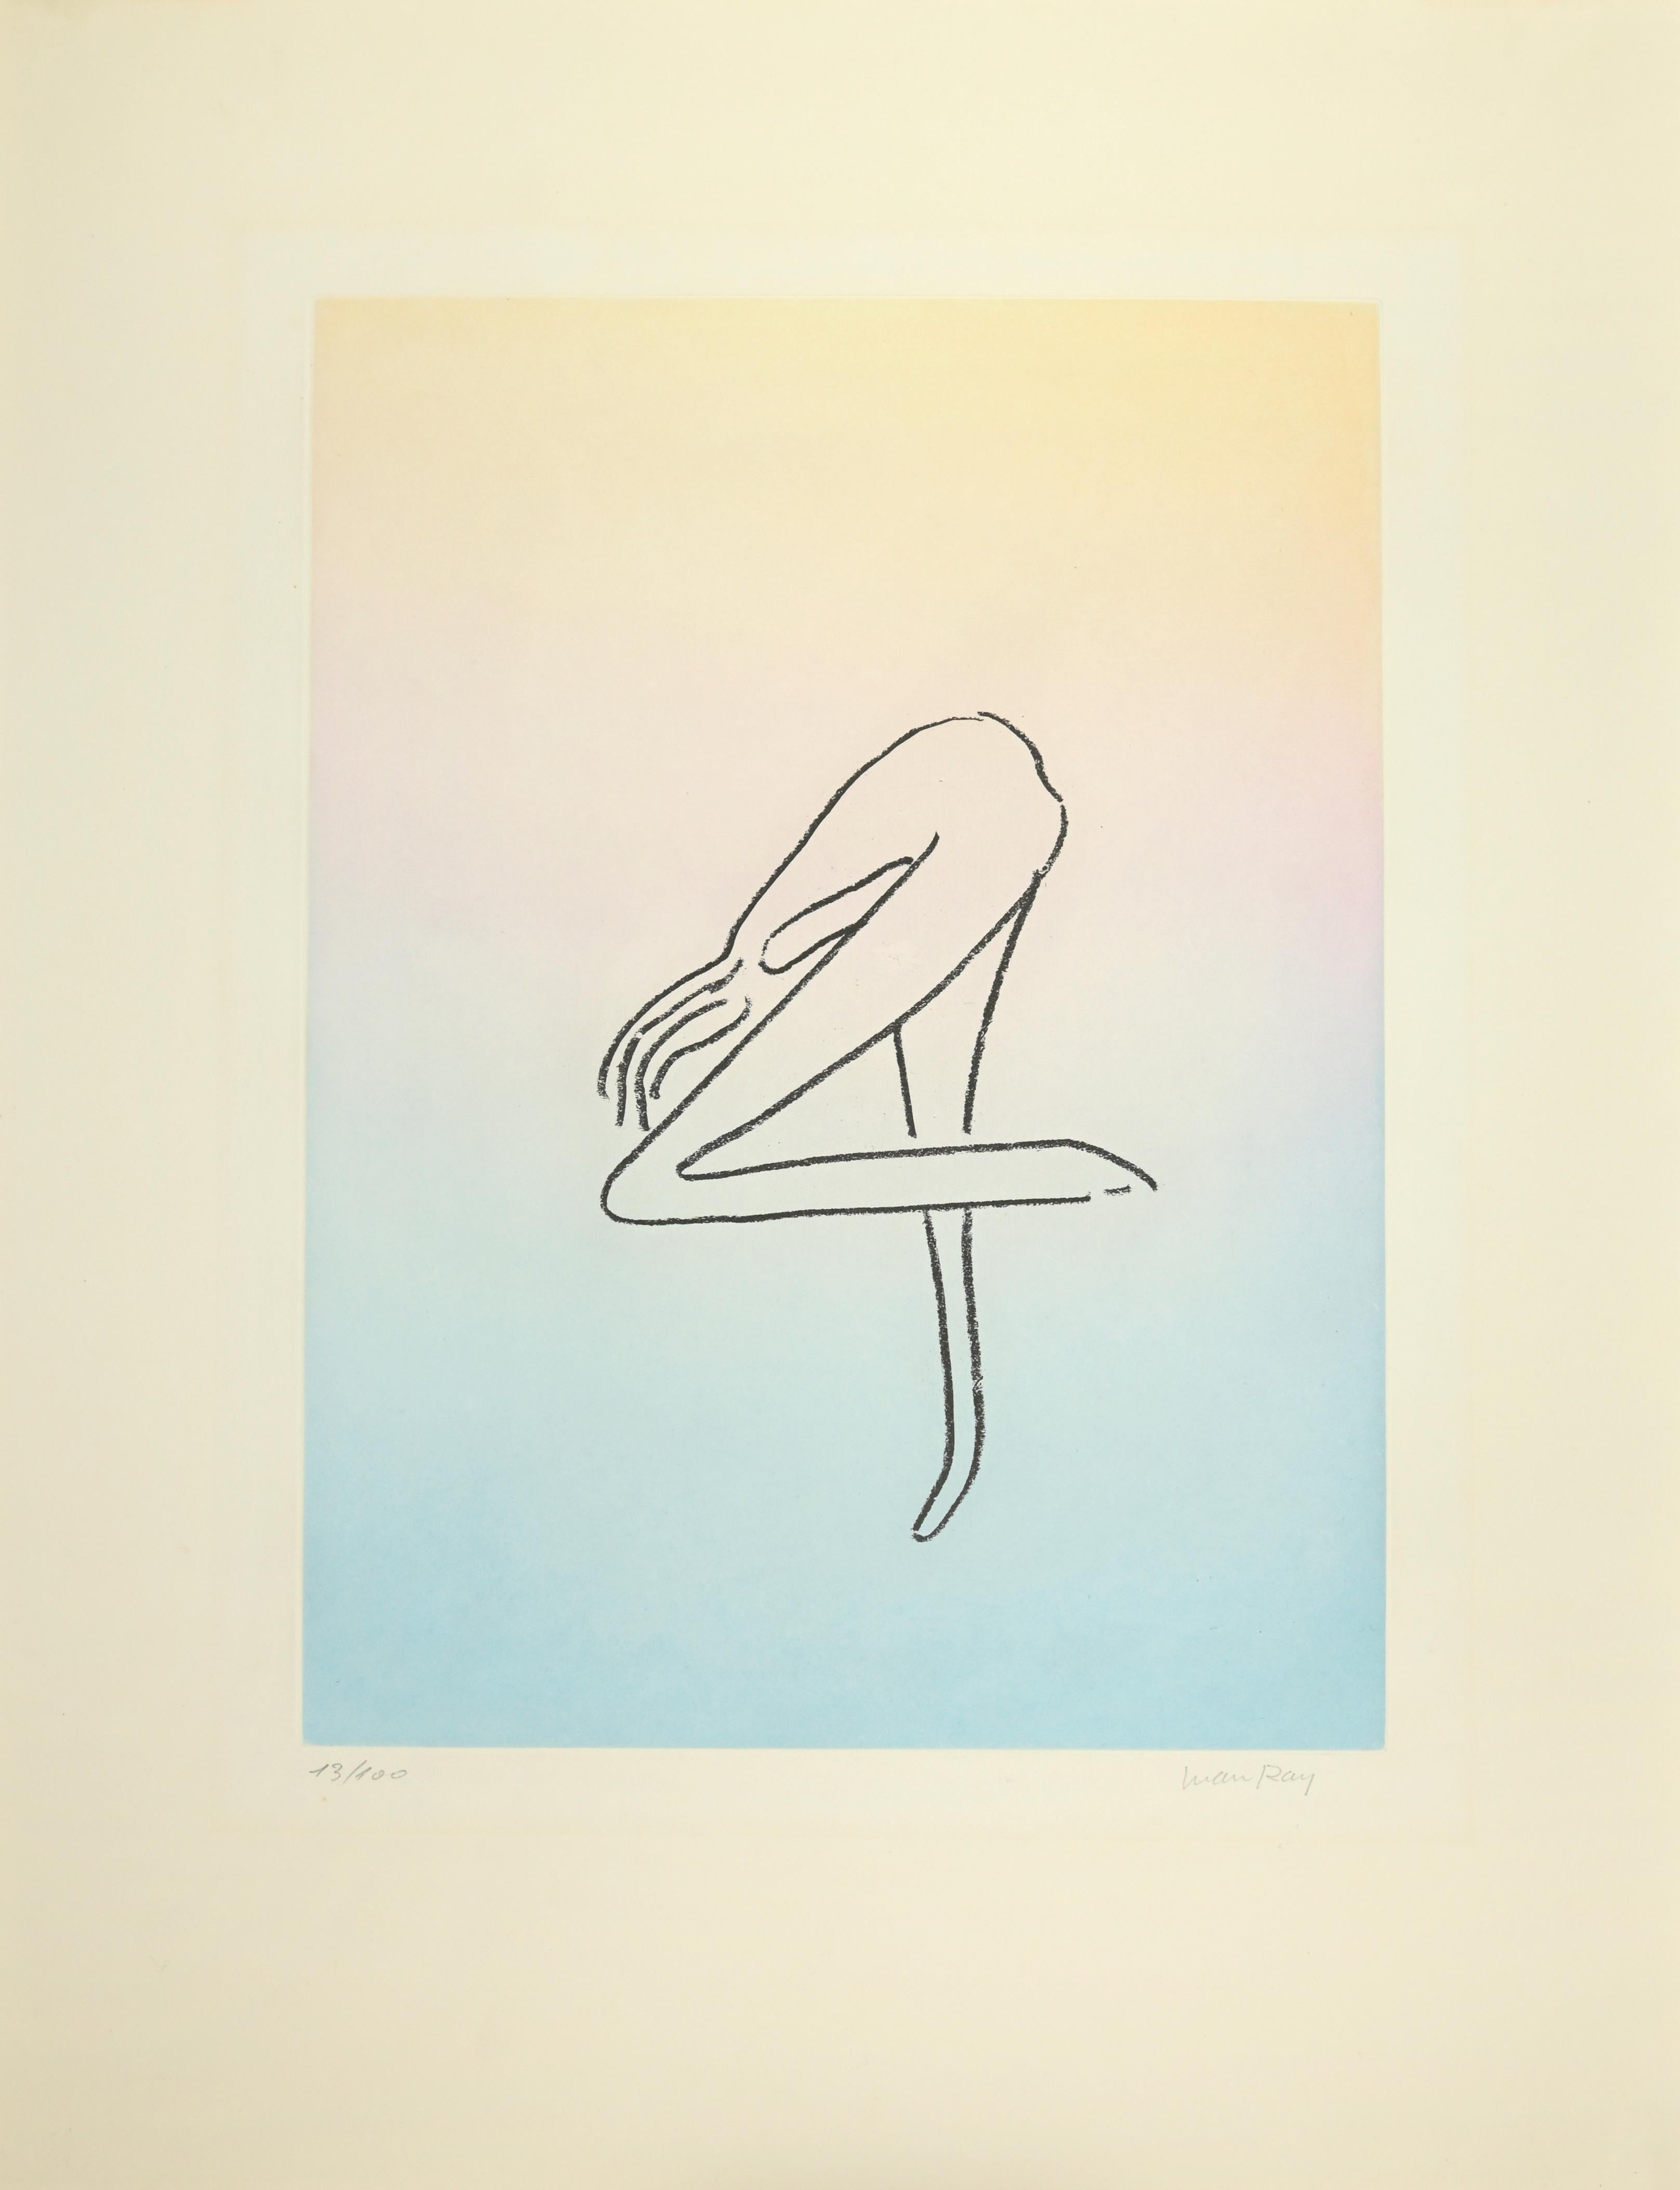 Untitled is an artwork realized by Man Ray (1890 - 1976) in 1970.

Etching and aquatint from the series Les Anatomes.

Aquatint etching on lana paper.

Hand signed and numbered. Edition 13/100.

Image 43 x 31.8 cm; Sheet 66 x 50.8 cm.

Ref.